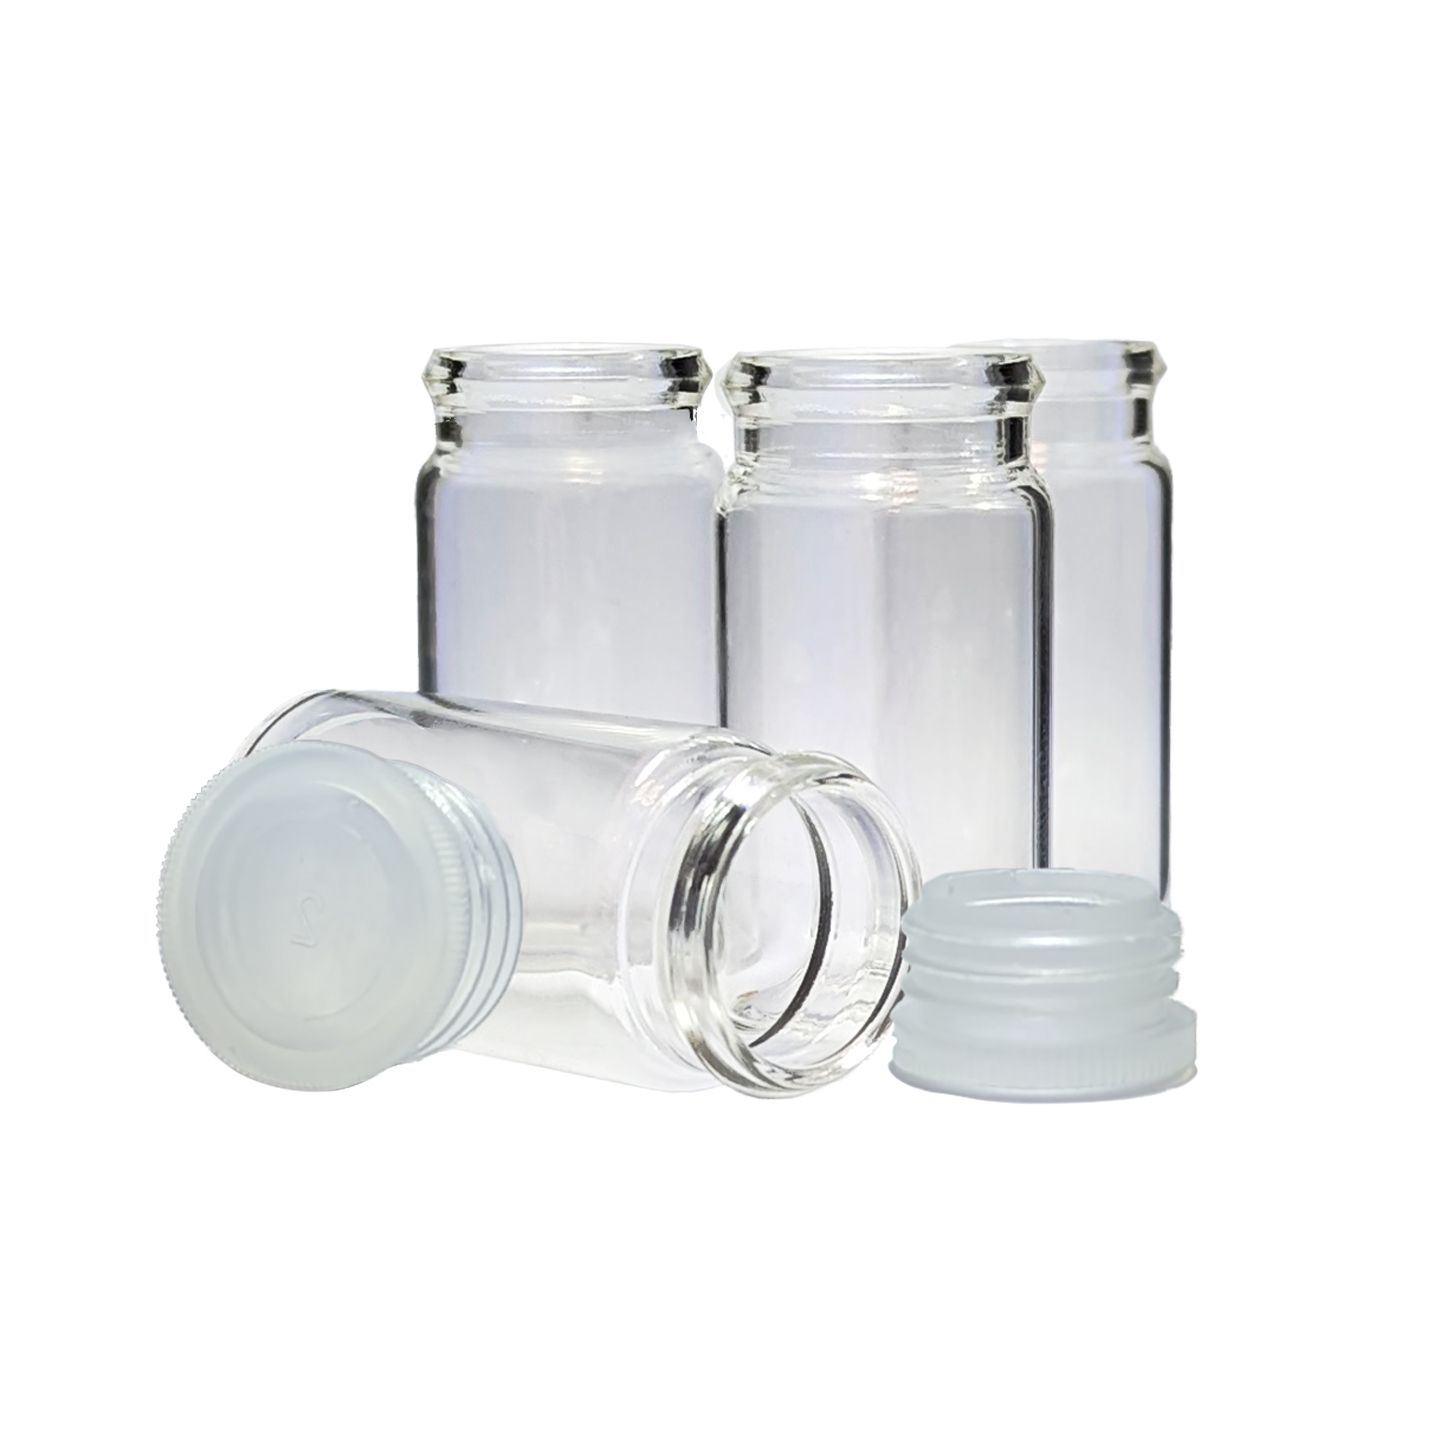 Vial, Rolled Rim Vials, Capacity 7ml, With Unattached Push In Closure